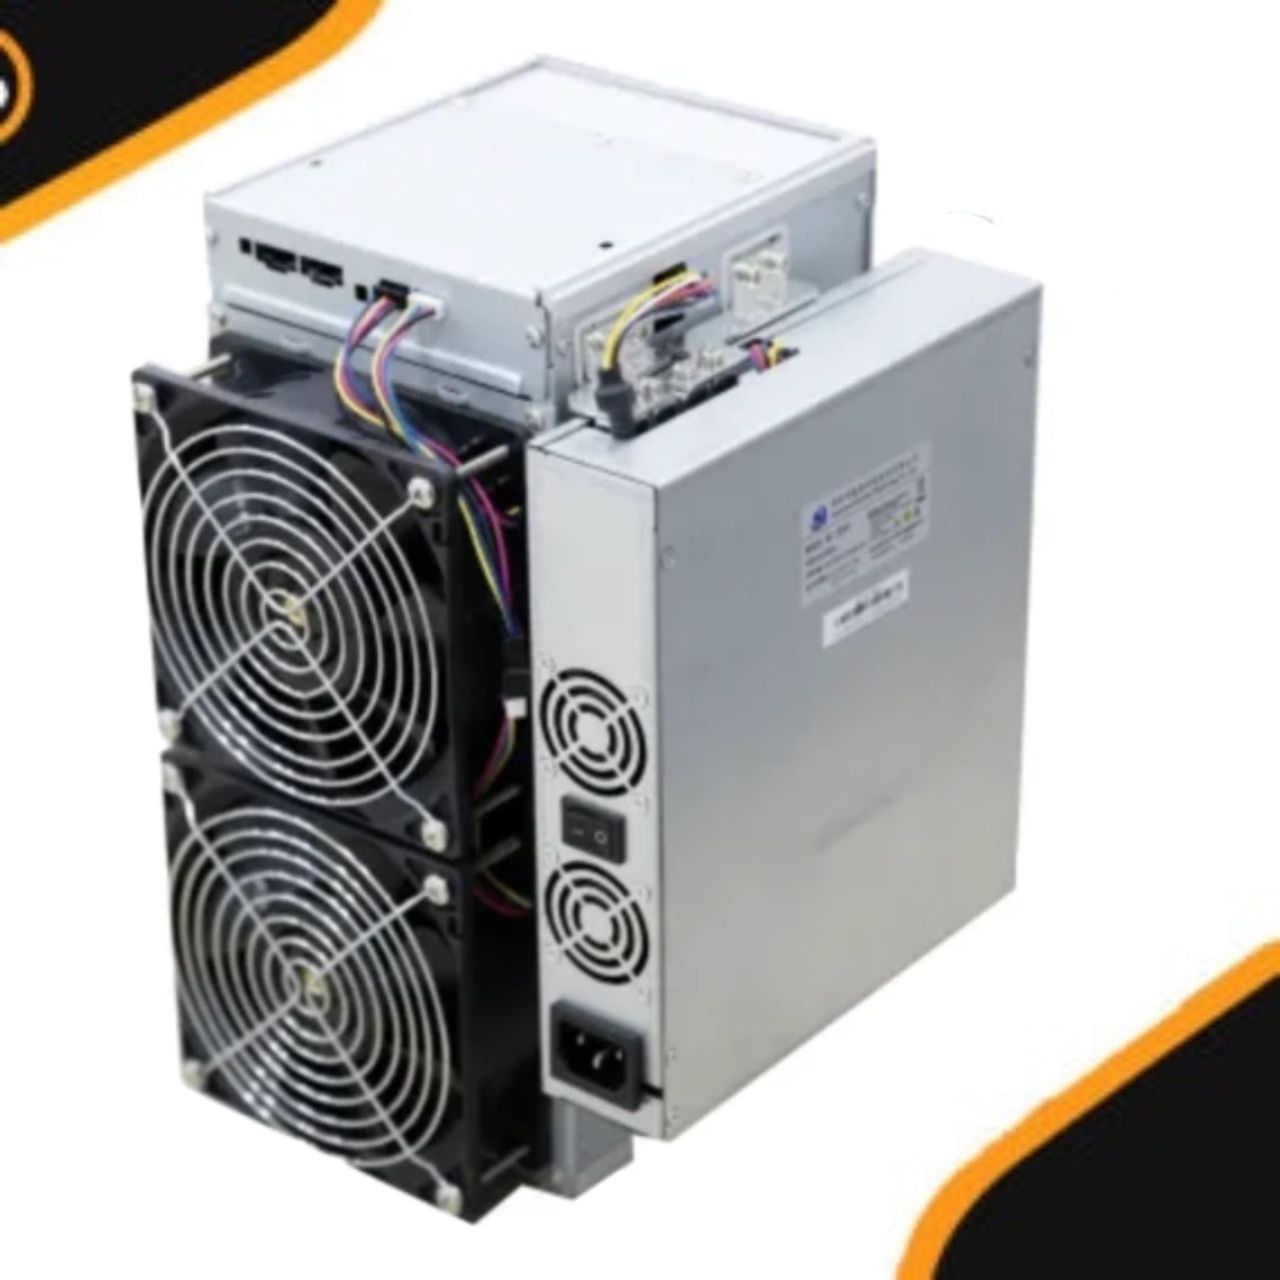 Get In Touch With Us For The Best Quality Miners,Rigs & GPU